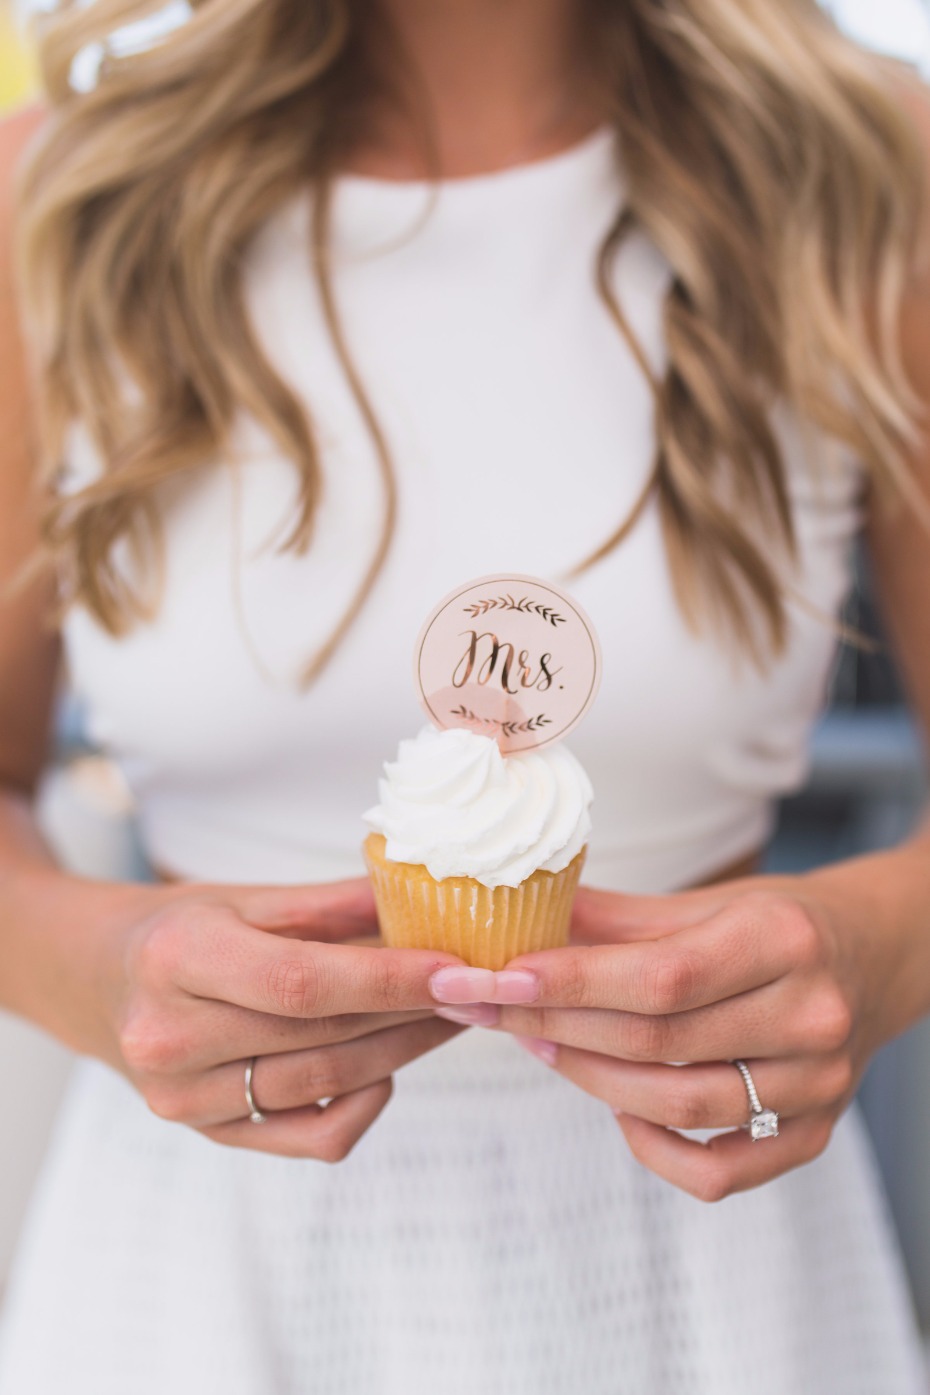 Mrs. cupcake for the bridal shower